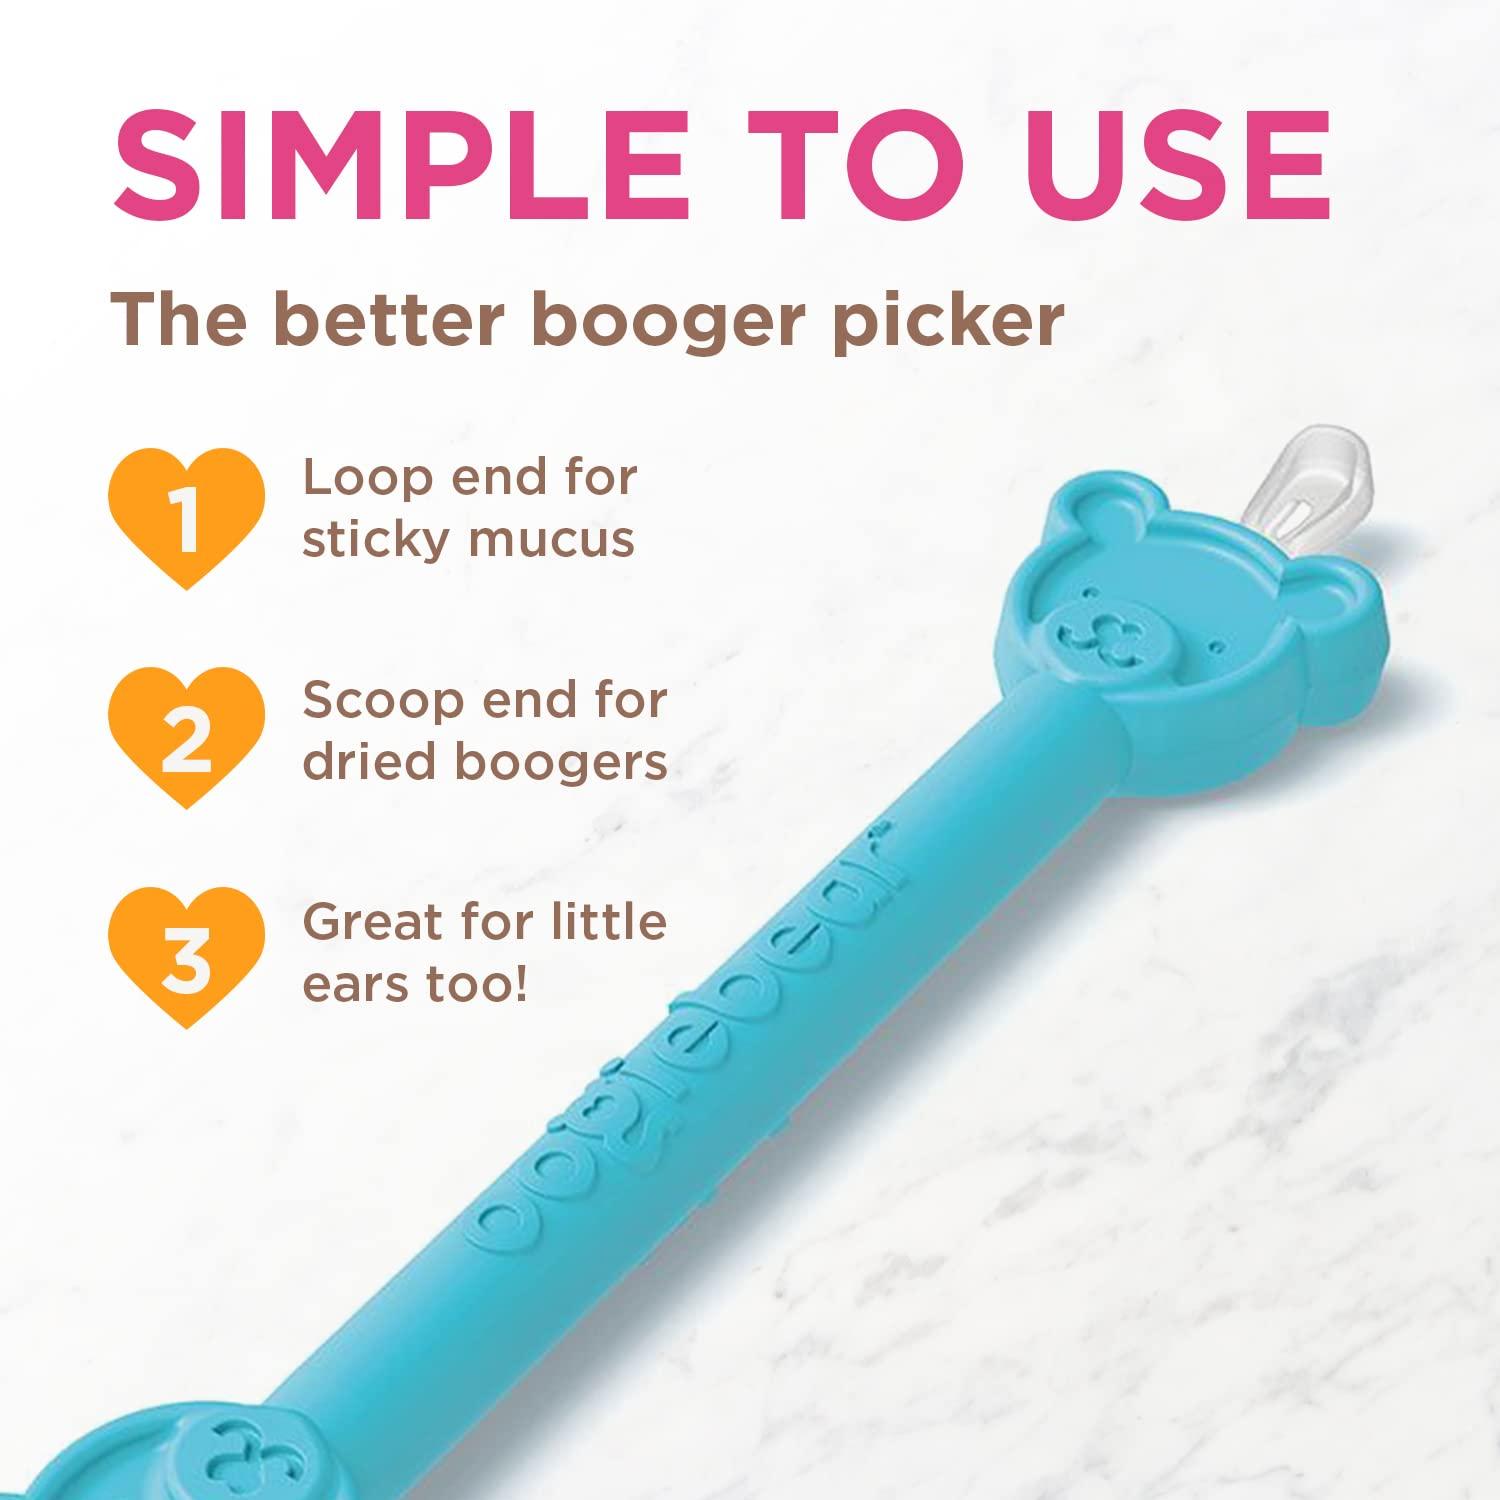 oogiebear - Nose and Ear Gadget. Safe, Easy Nasal Booger and Ear Wax  Remover for Newborns, Infants and Toddlers. Dual Earwax and Snot Remover.  Aspirator Alternative